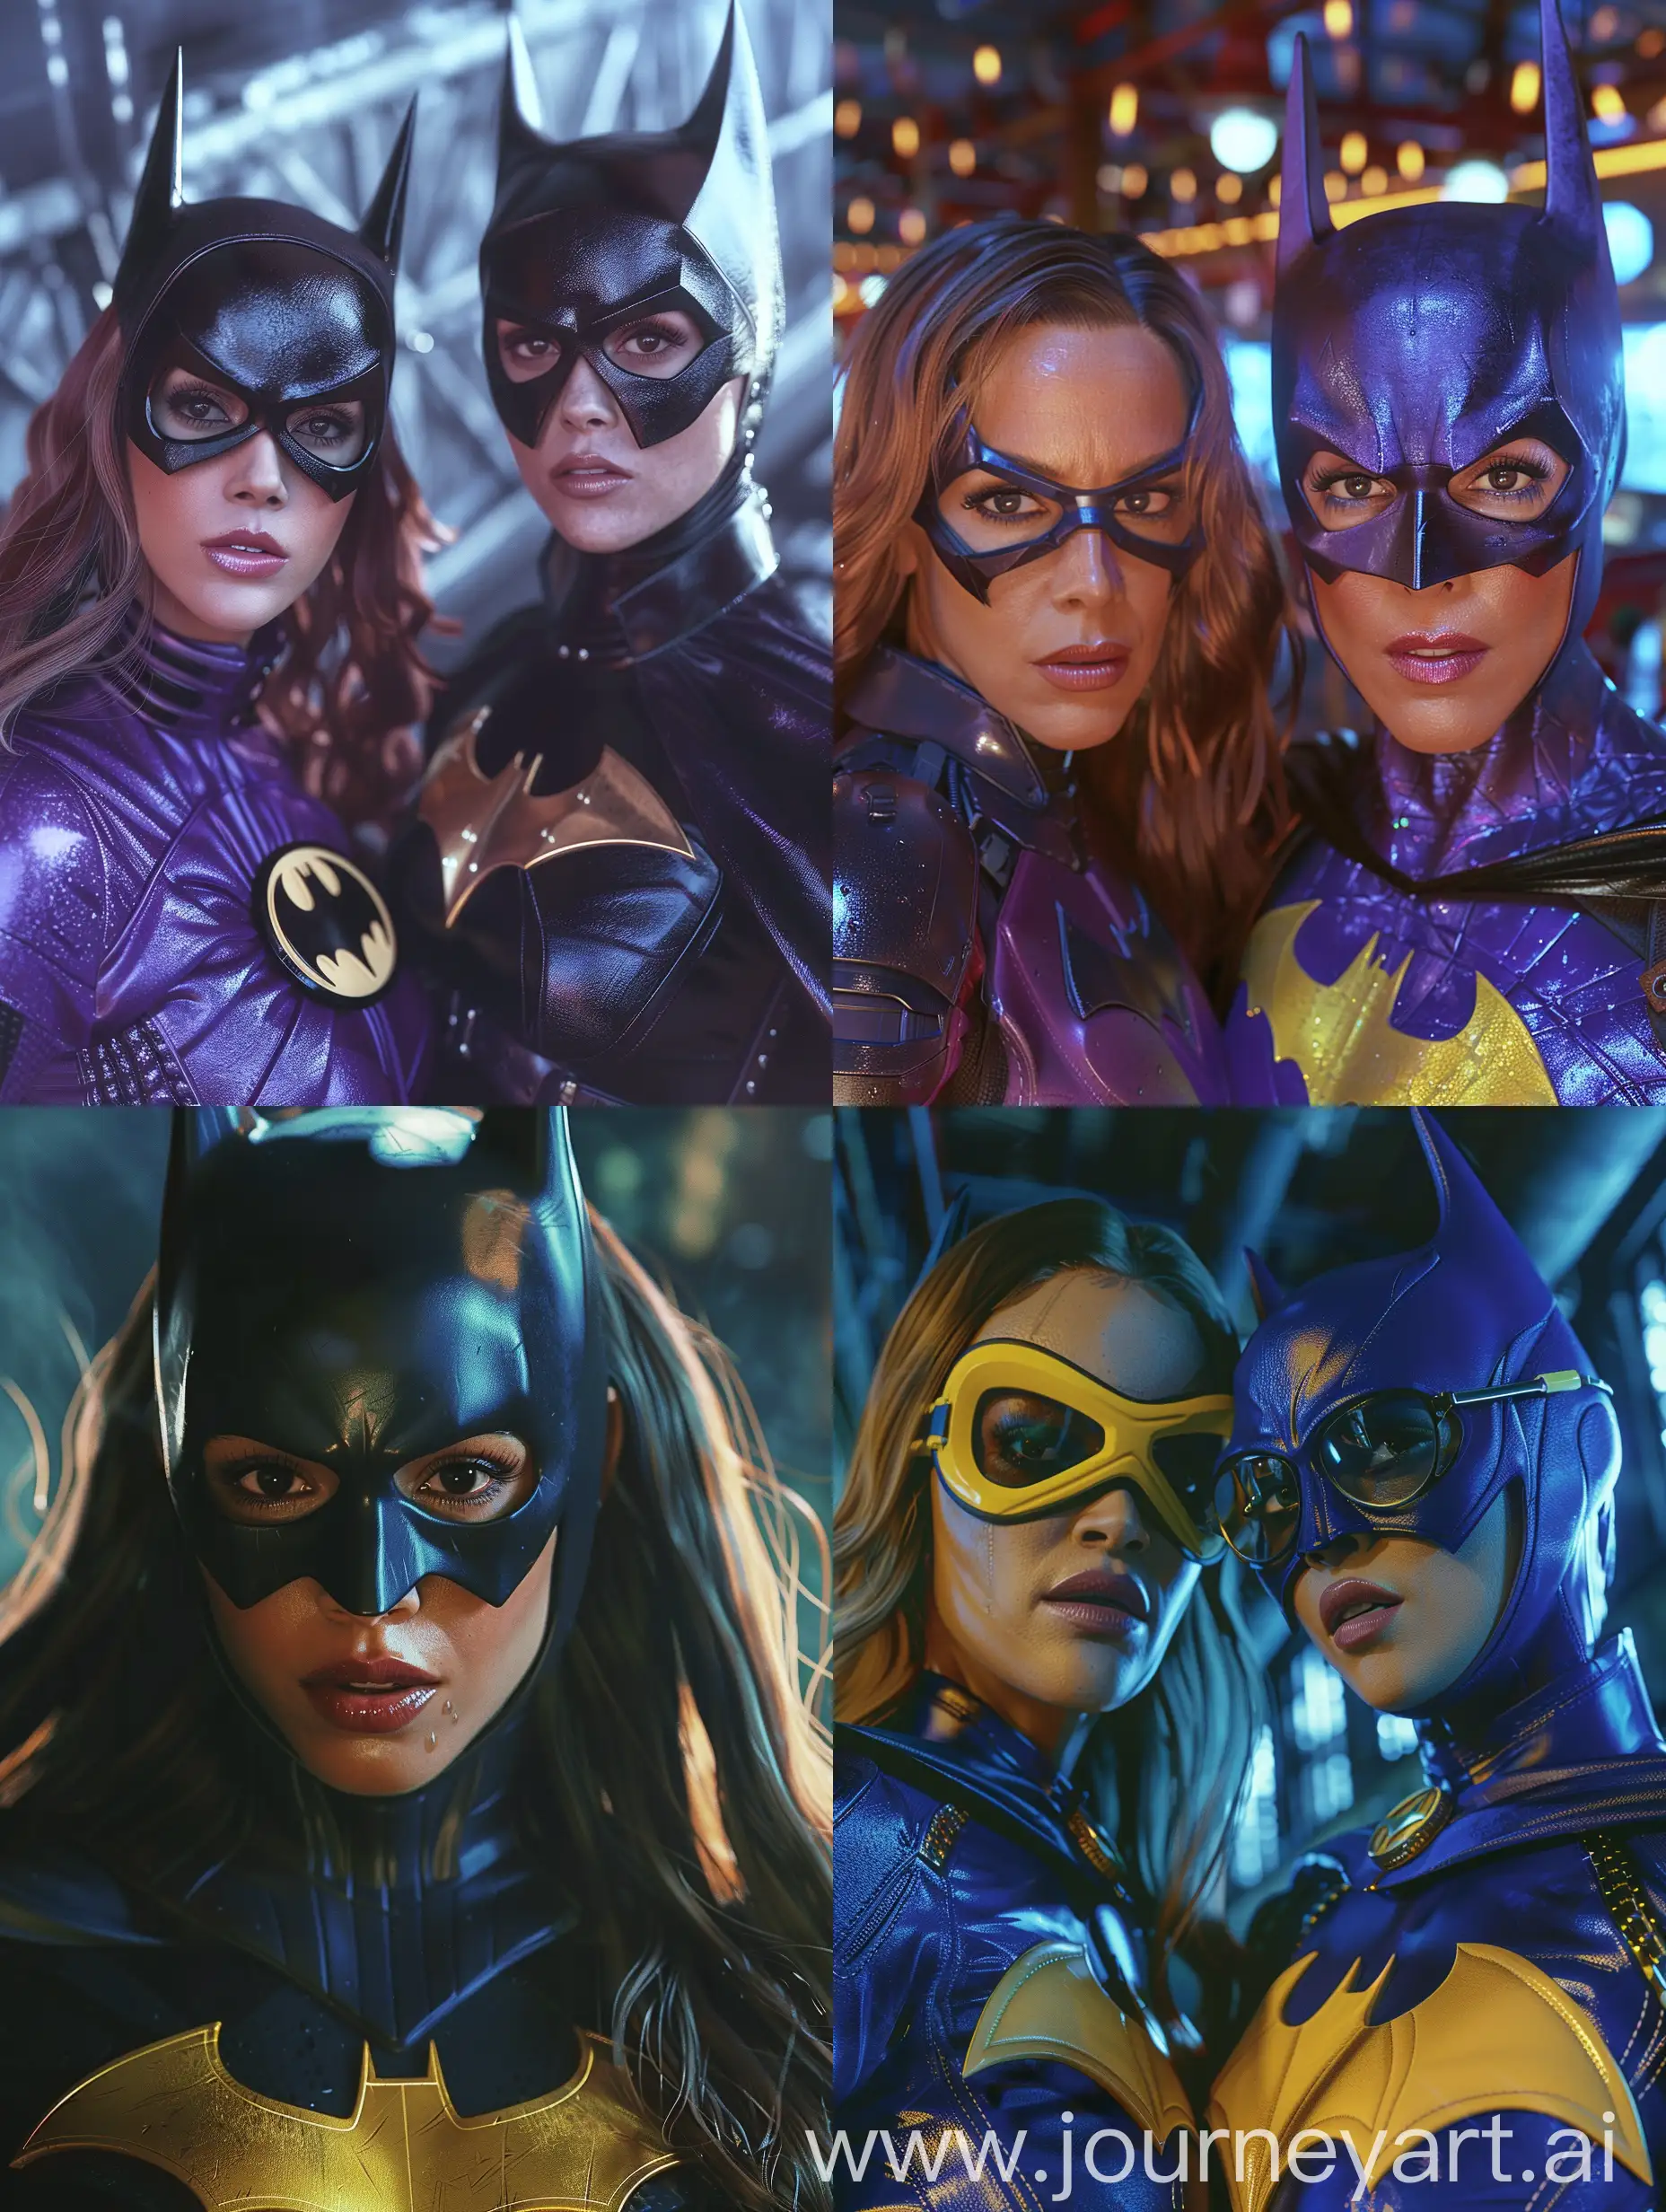 Jeniffer-Lopez-and-Katy-Perry-as-Batgirl-Movie-Stars-with-Kodak-Portra-Camera-in-Rich-Hyper-Realistic-Colors